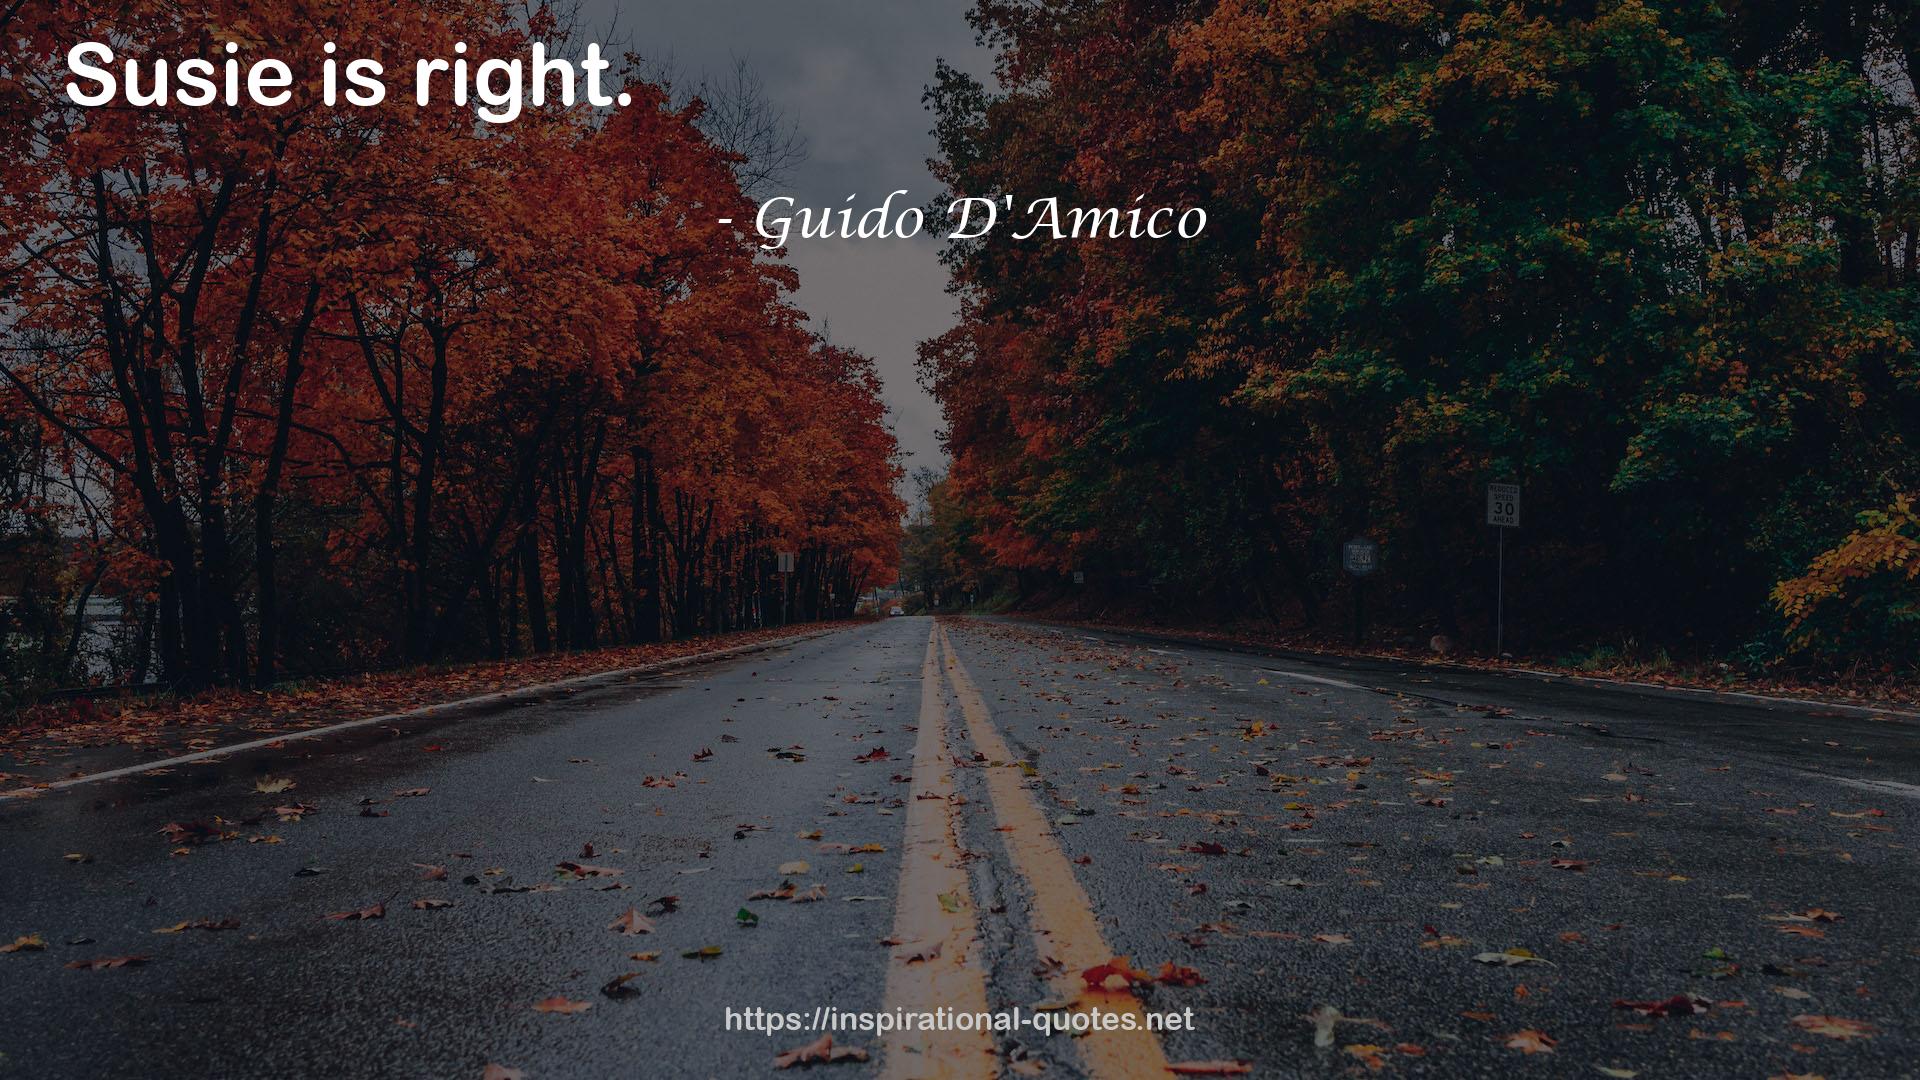 Guido D'Amico QUOTES